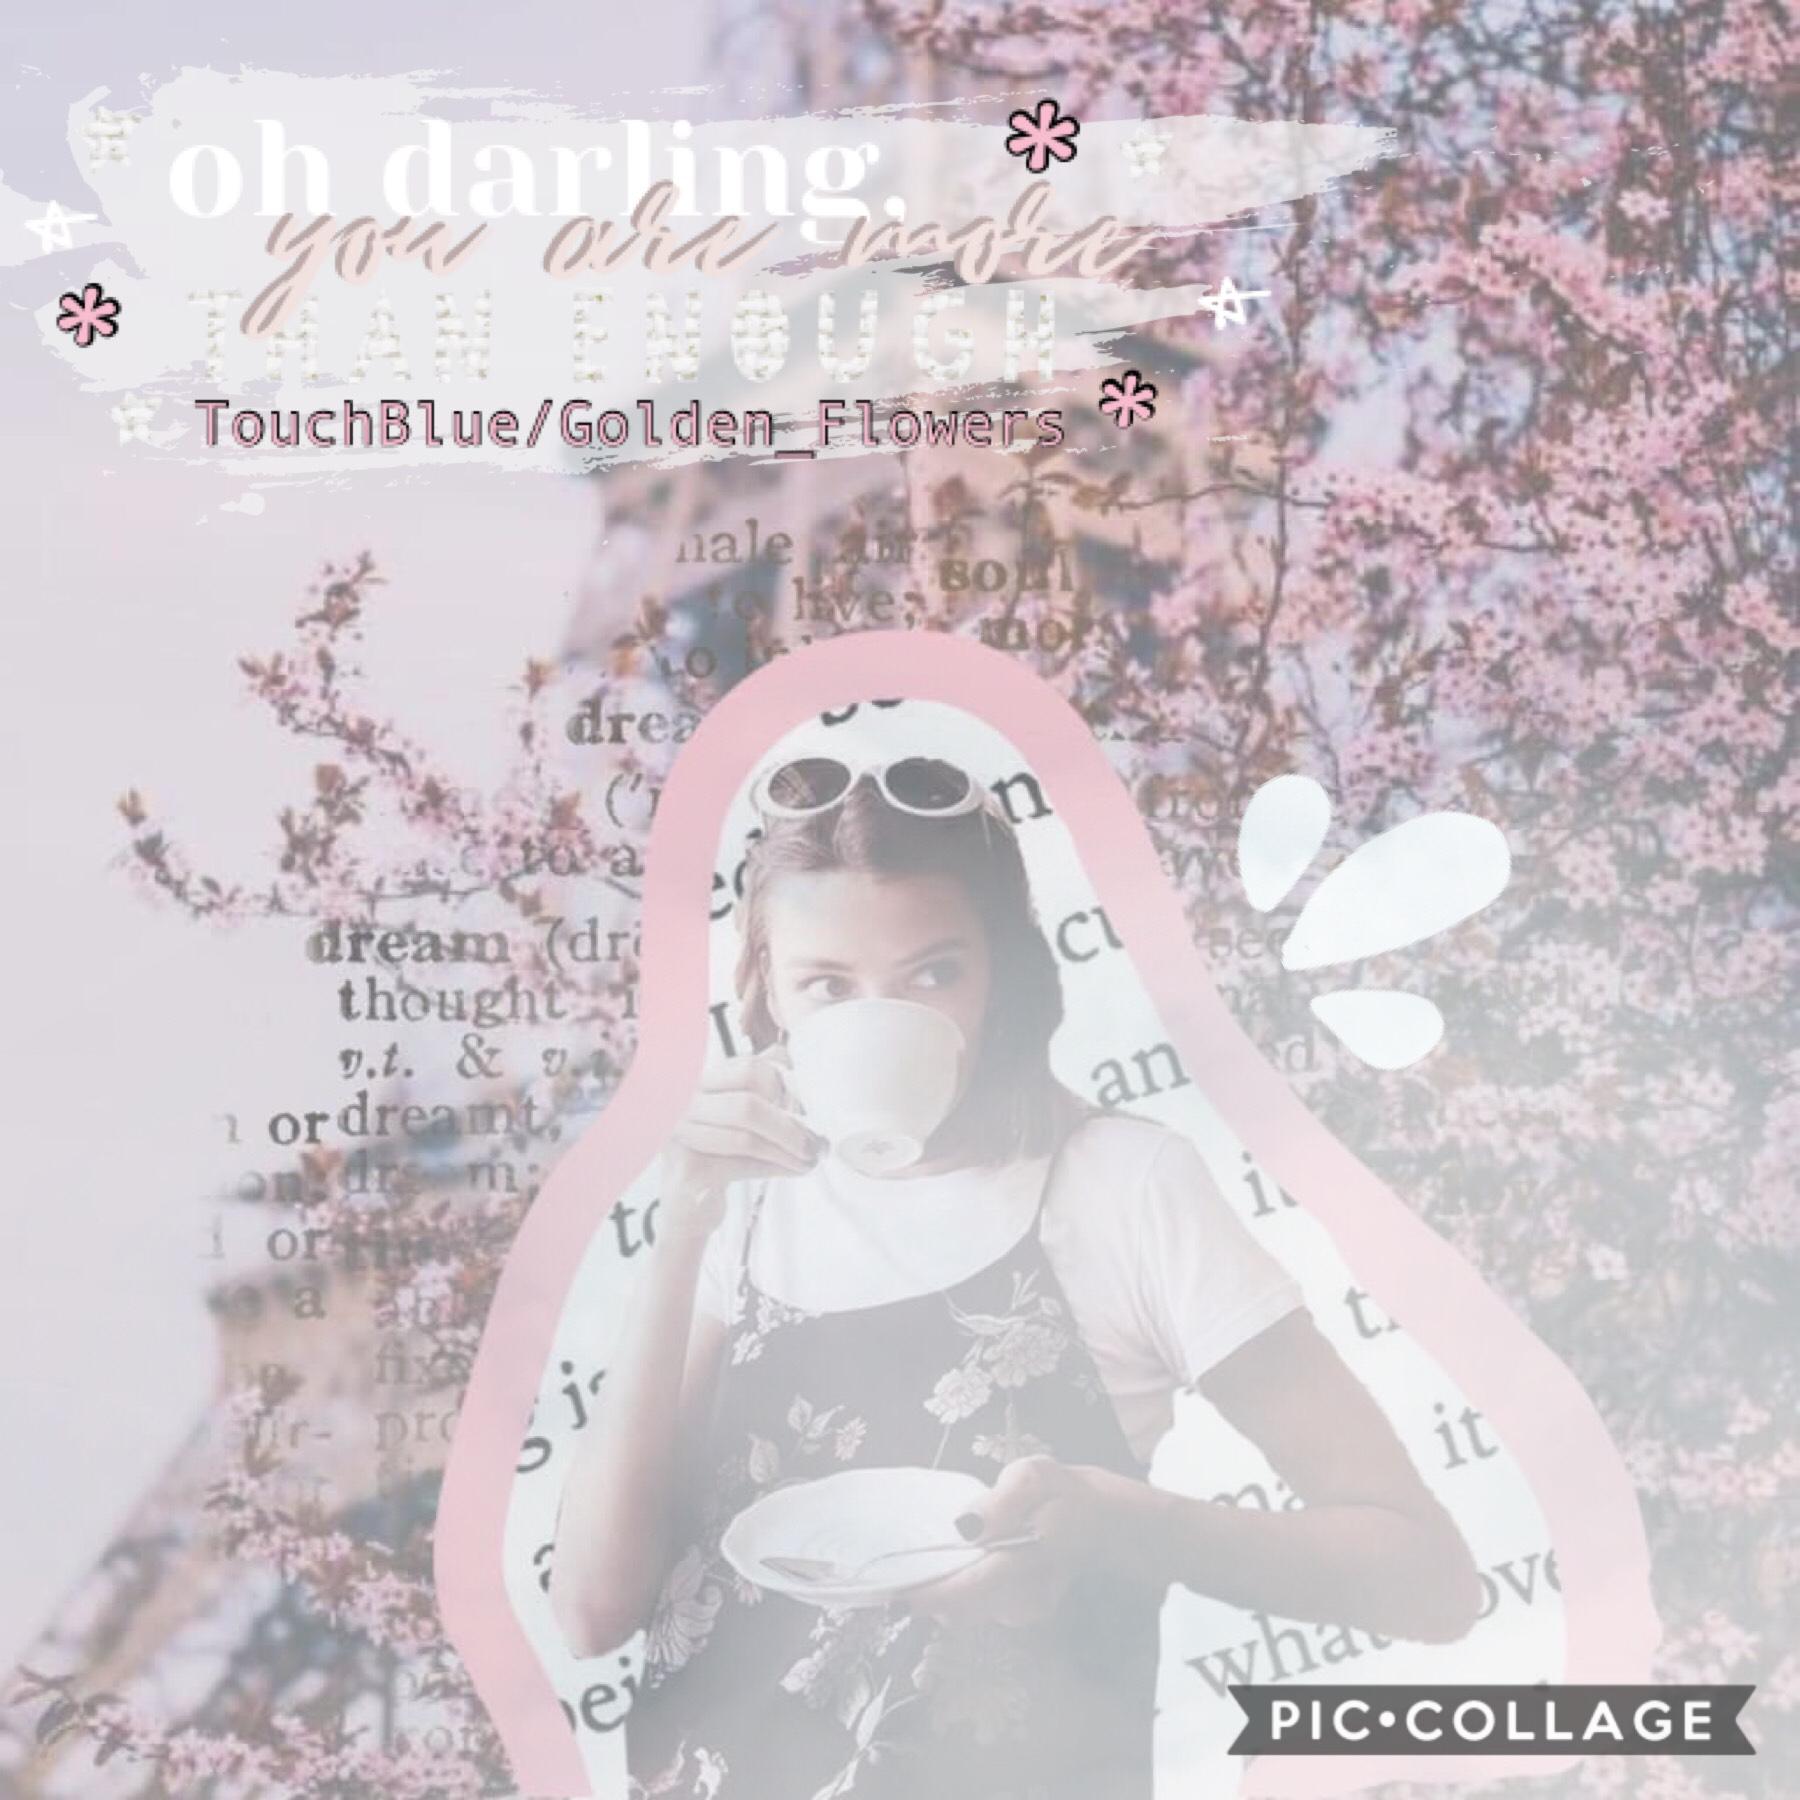 🌸 tap 🌸
Collab with the amazing golden_flowers!!!! She did the beautiful complex bg, and I did the text!!!! What do you think??? Rate 1-10 ❤️✨